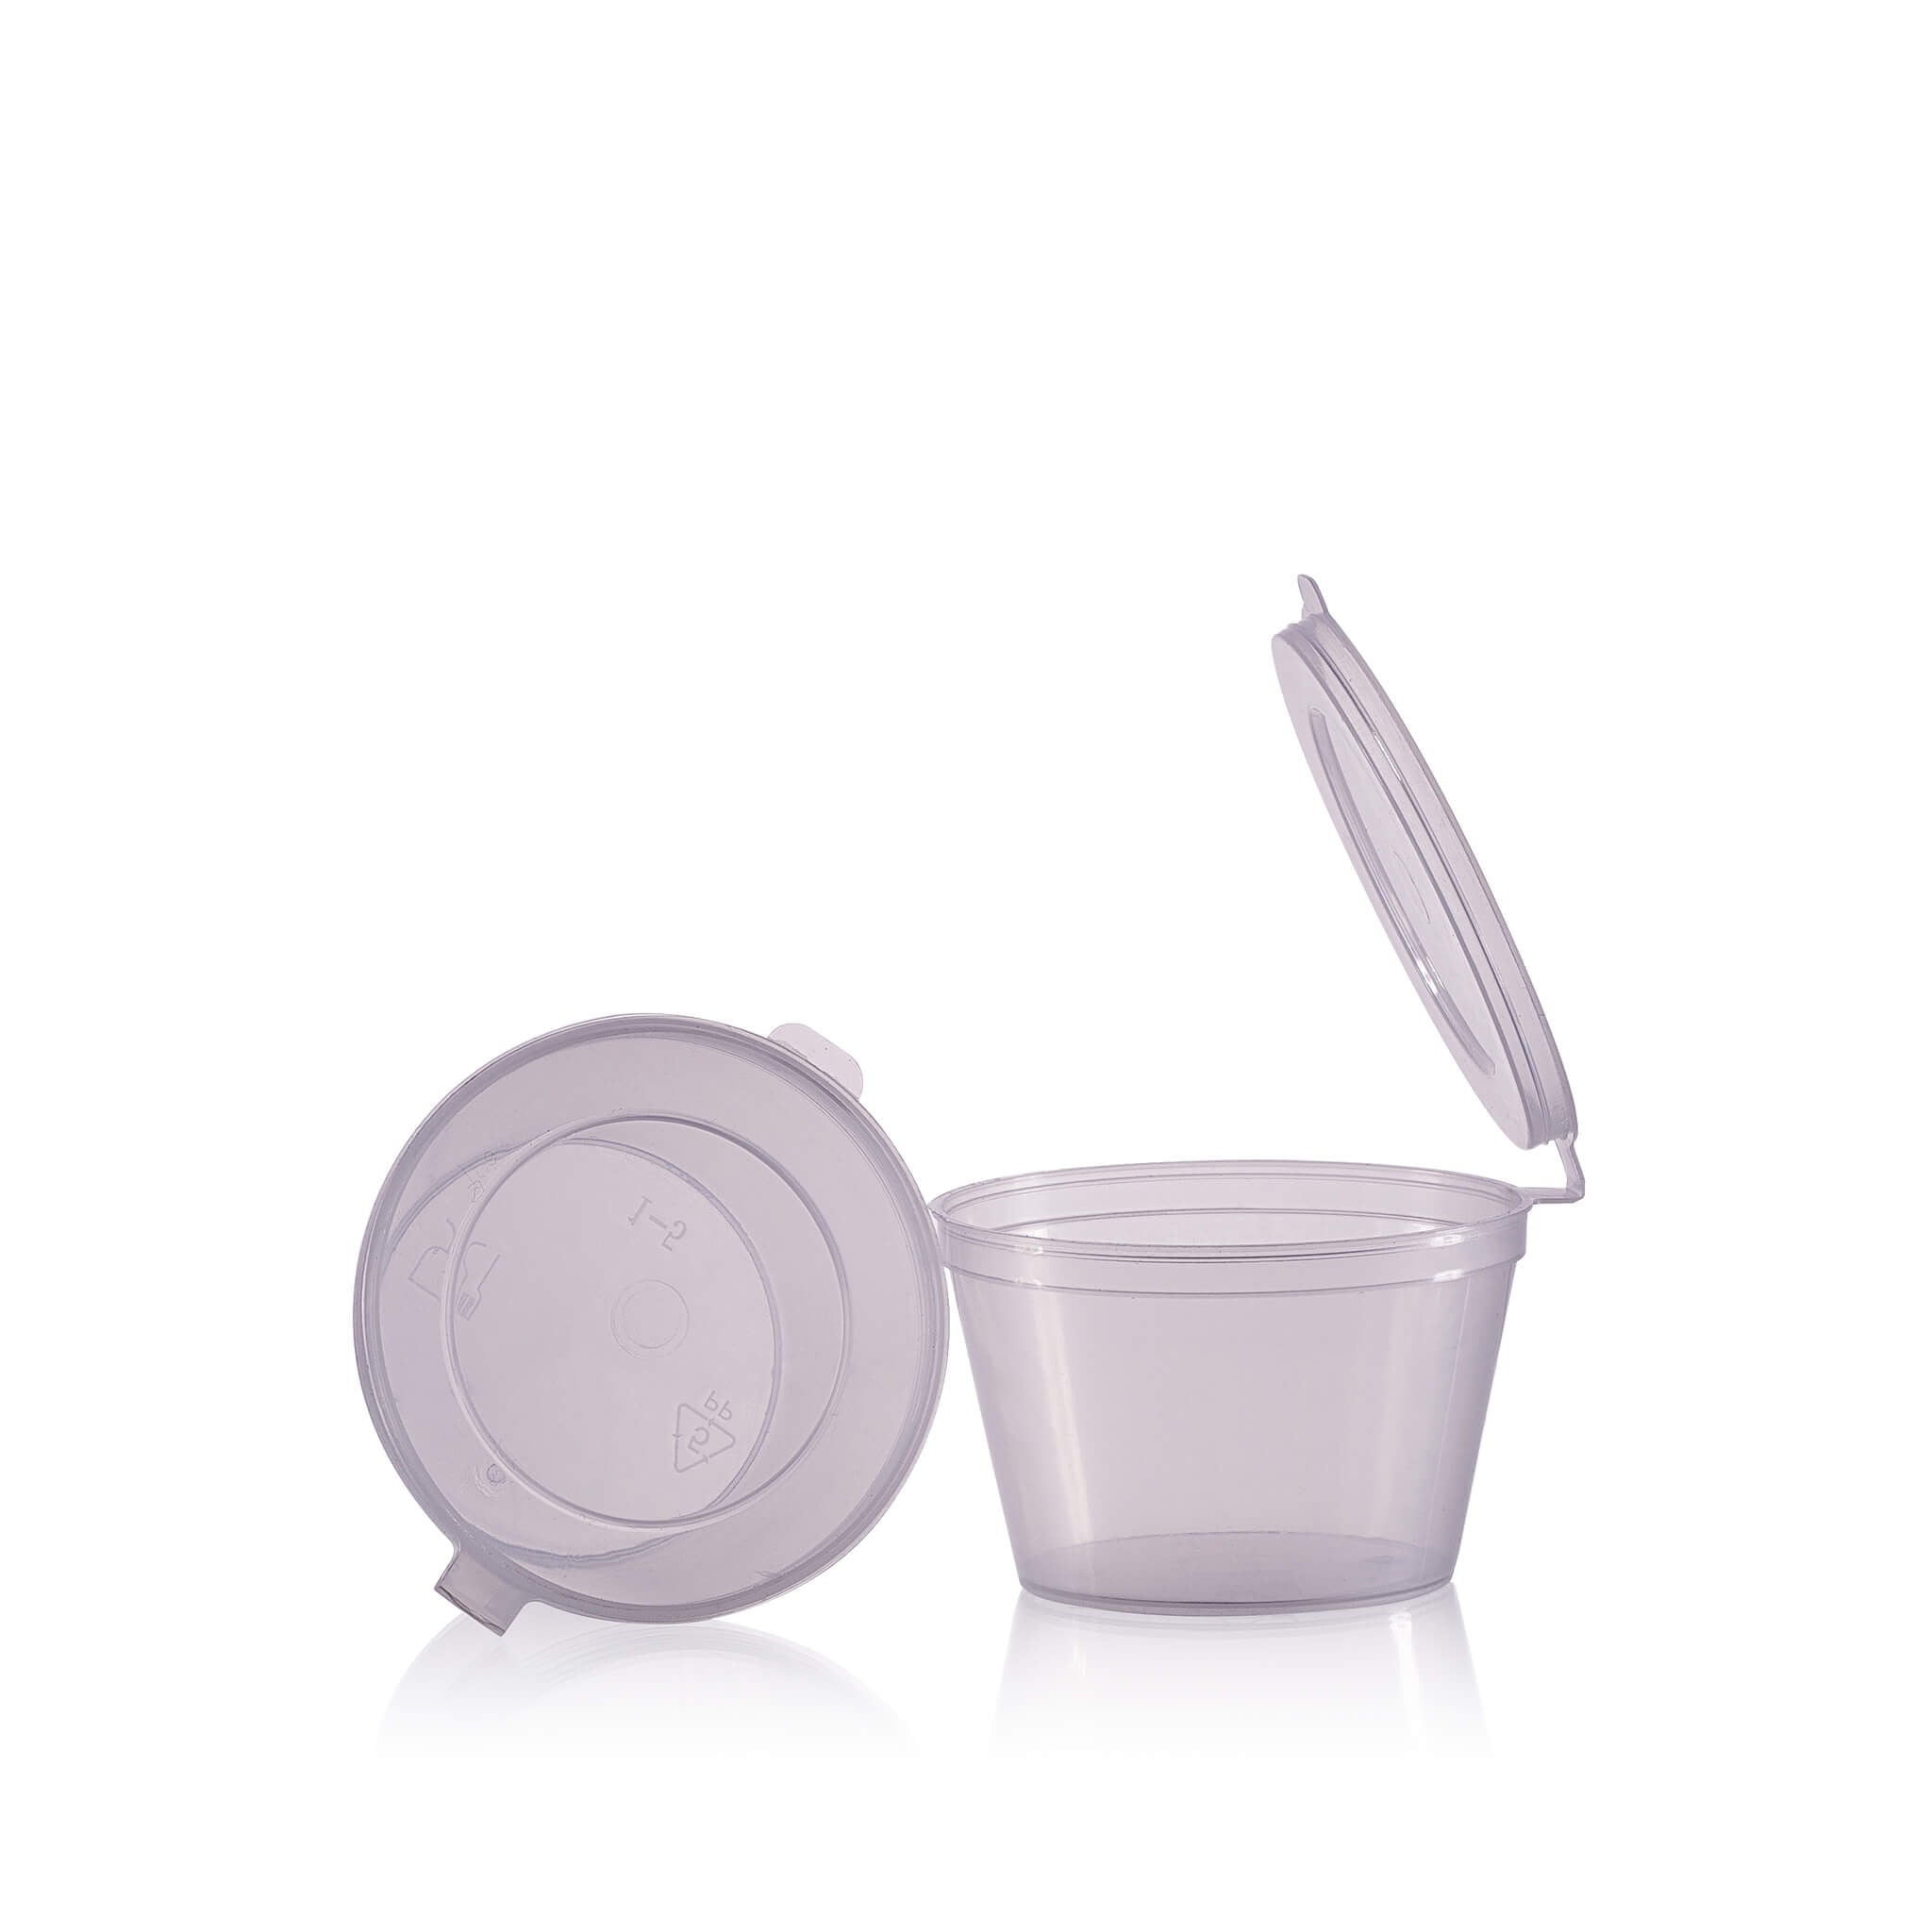 Sauce Pot with Hinged Lid 2oz - 1000